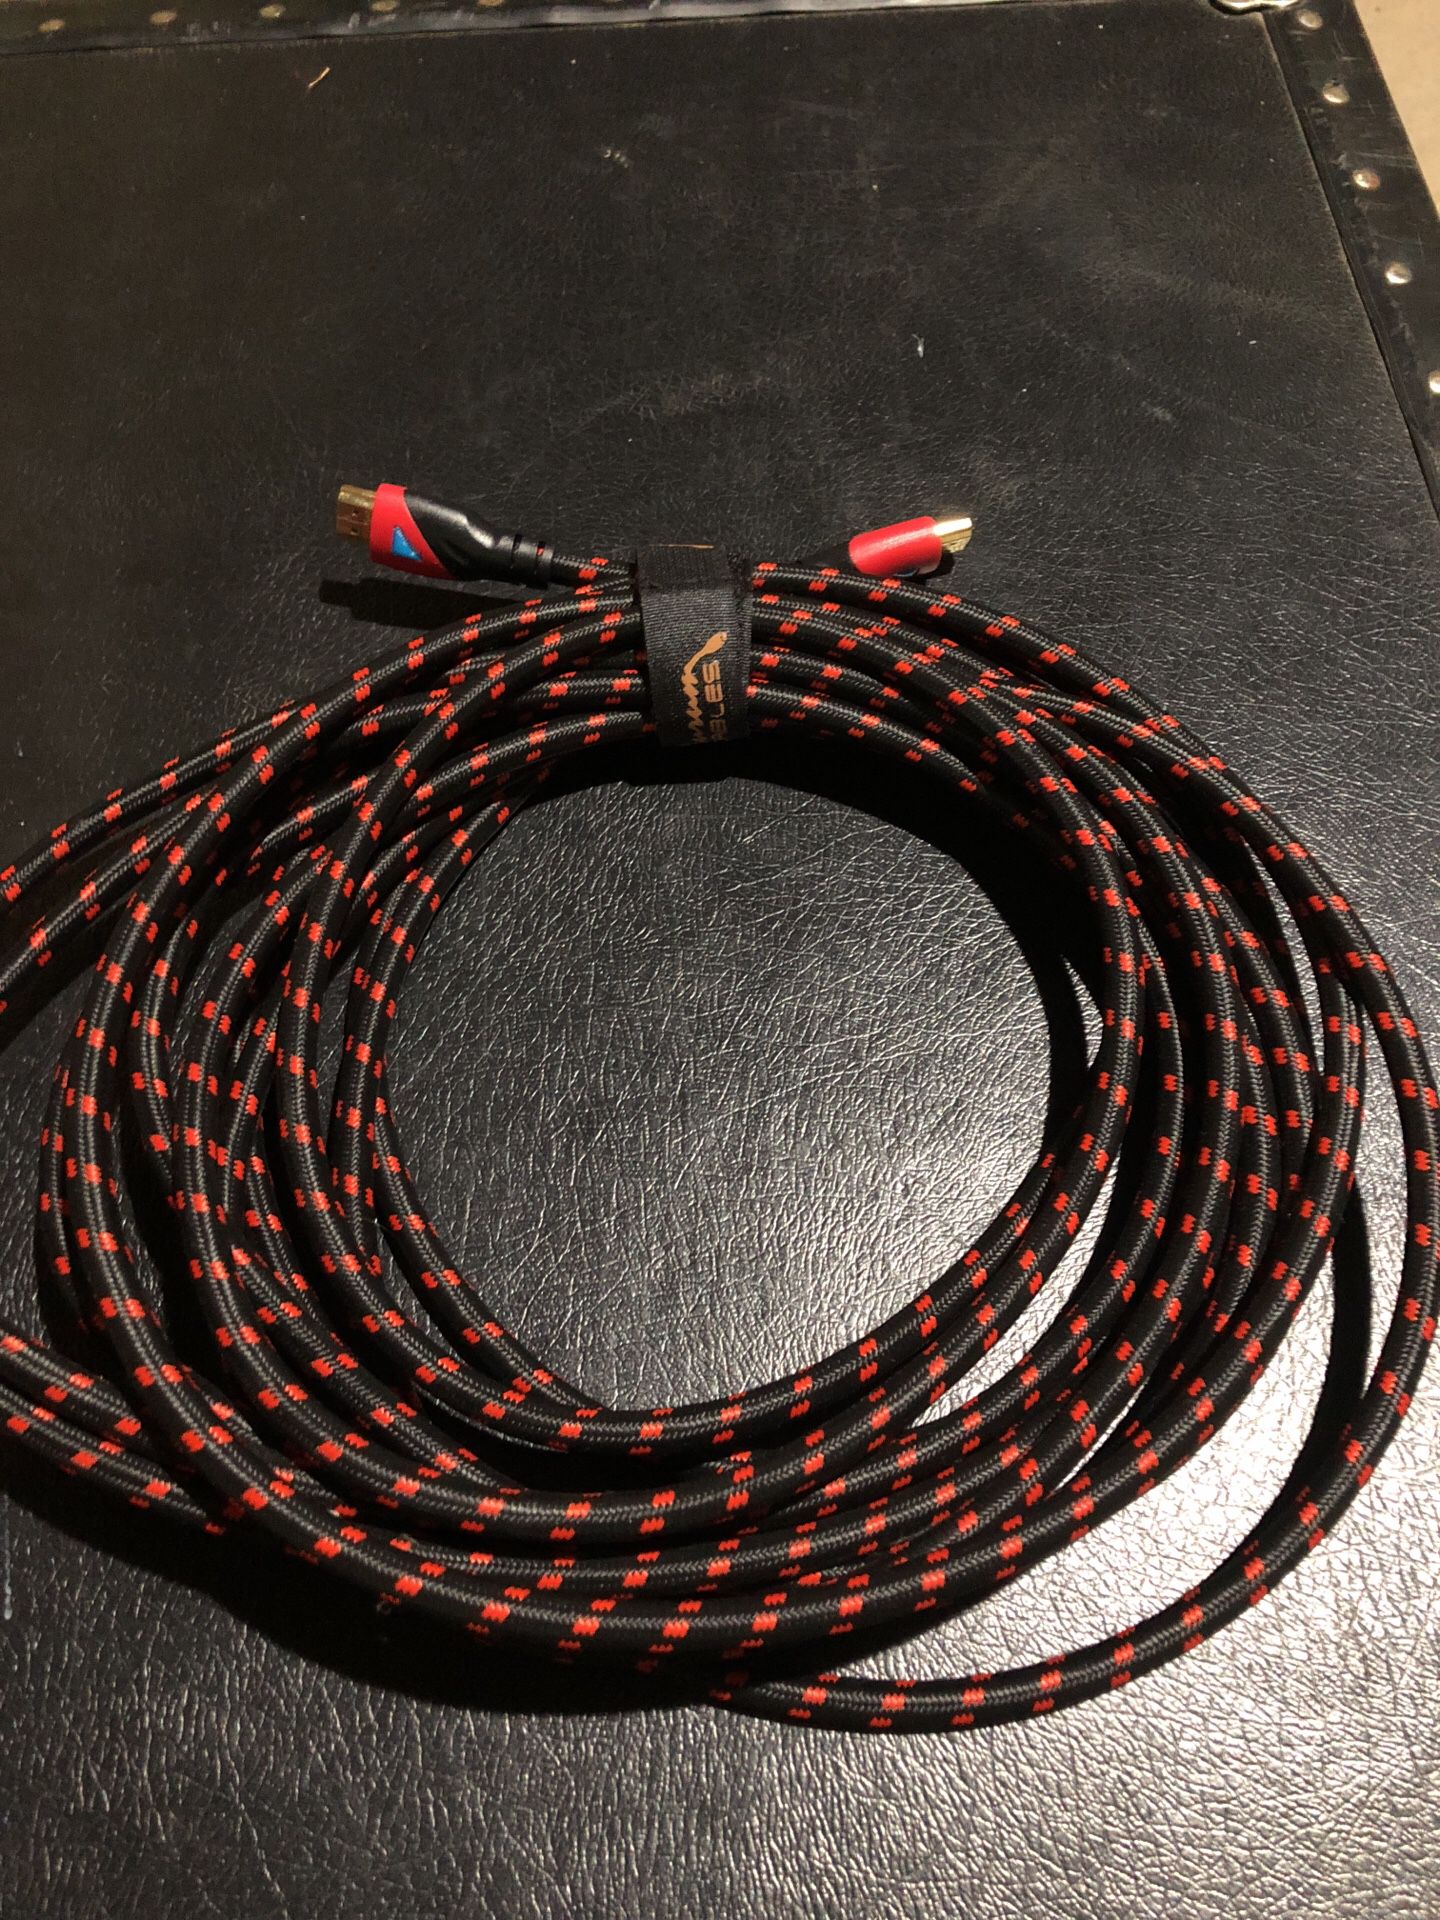 25 ft HDMI cable